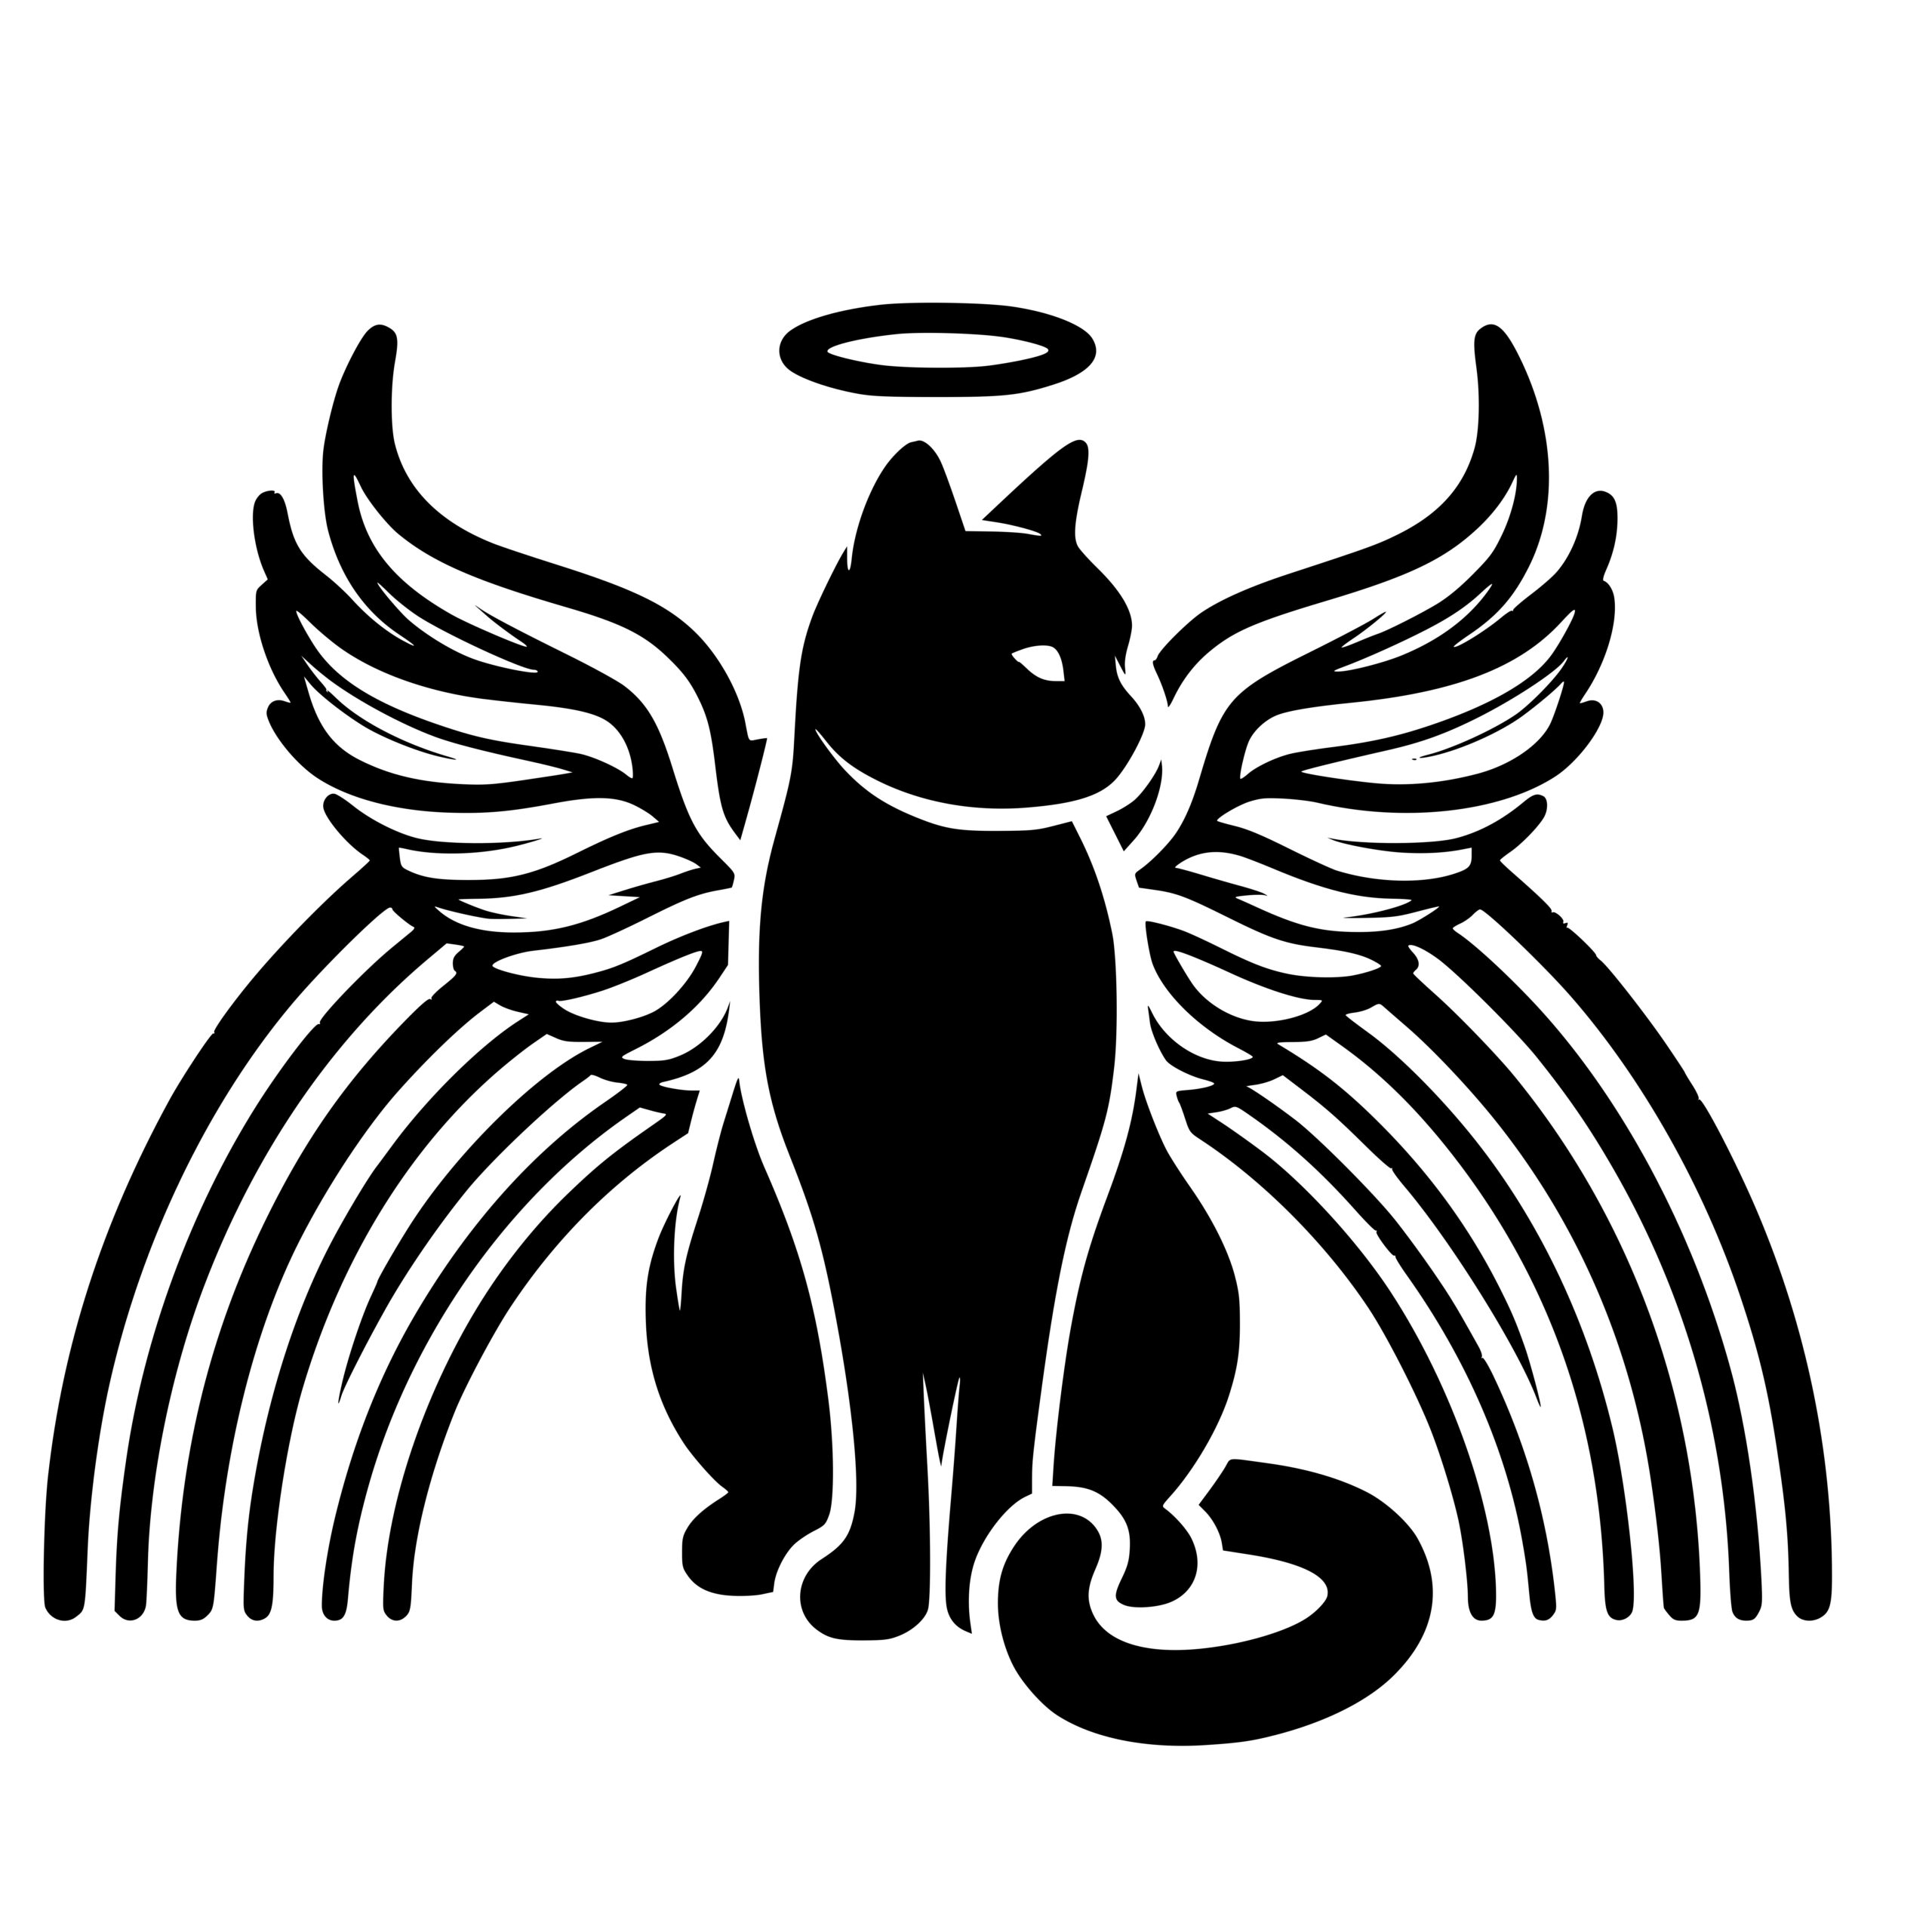 Rainbow Angel Cat SVG File for Cricut, Laser, Silhouette, Cameo